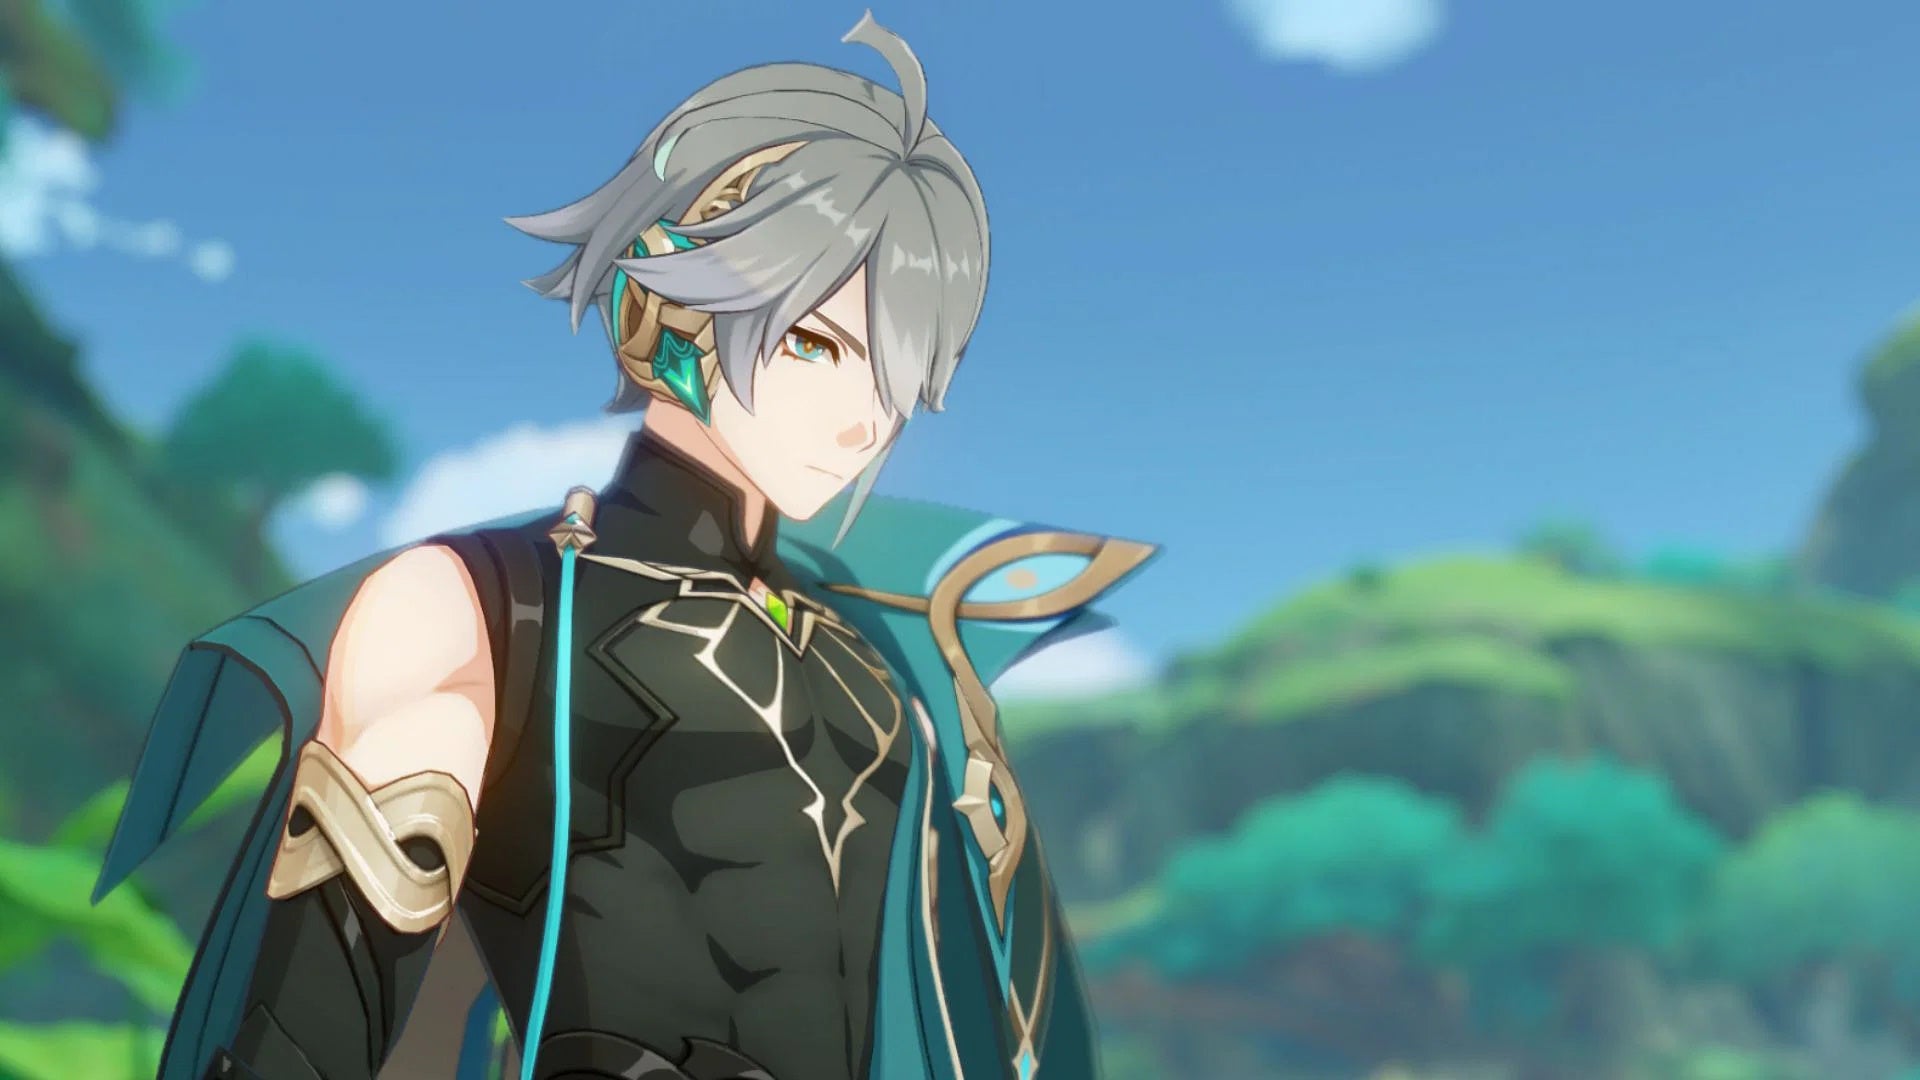 Genshin Impact Alhaitham teams: An anime man with short silver hair, wearing a green cloak over a transparent black shirt, is standing against a heavily wooded backdrop. He's looking down at an unseen item and wears a concerned expression on his face.